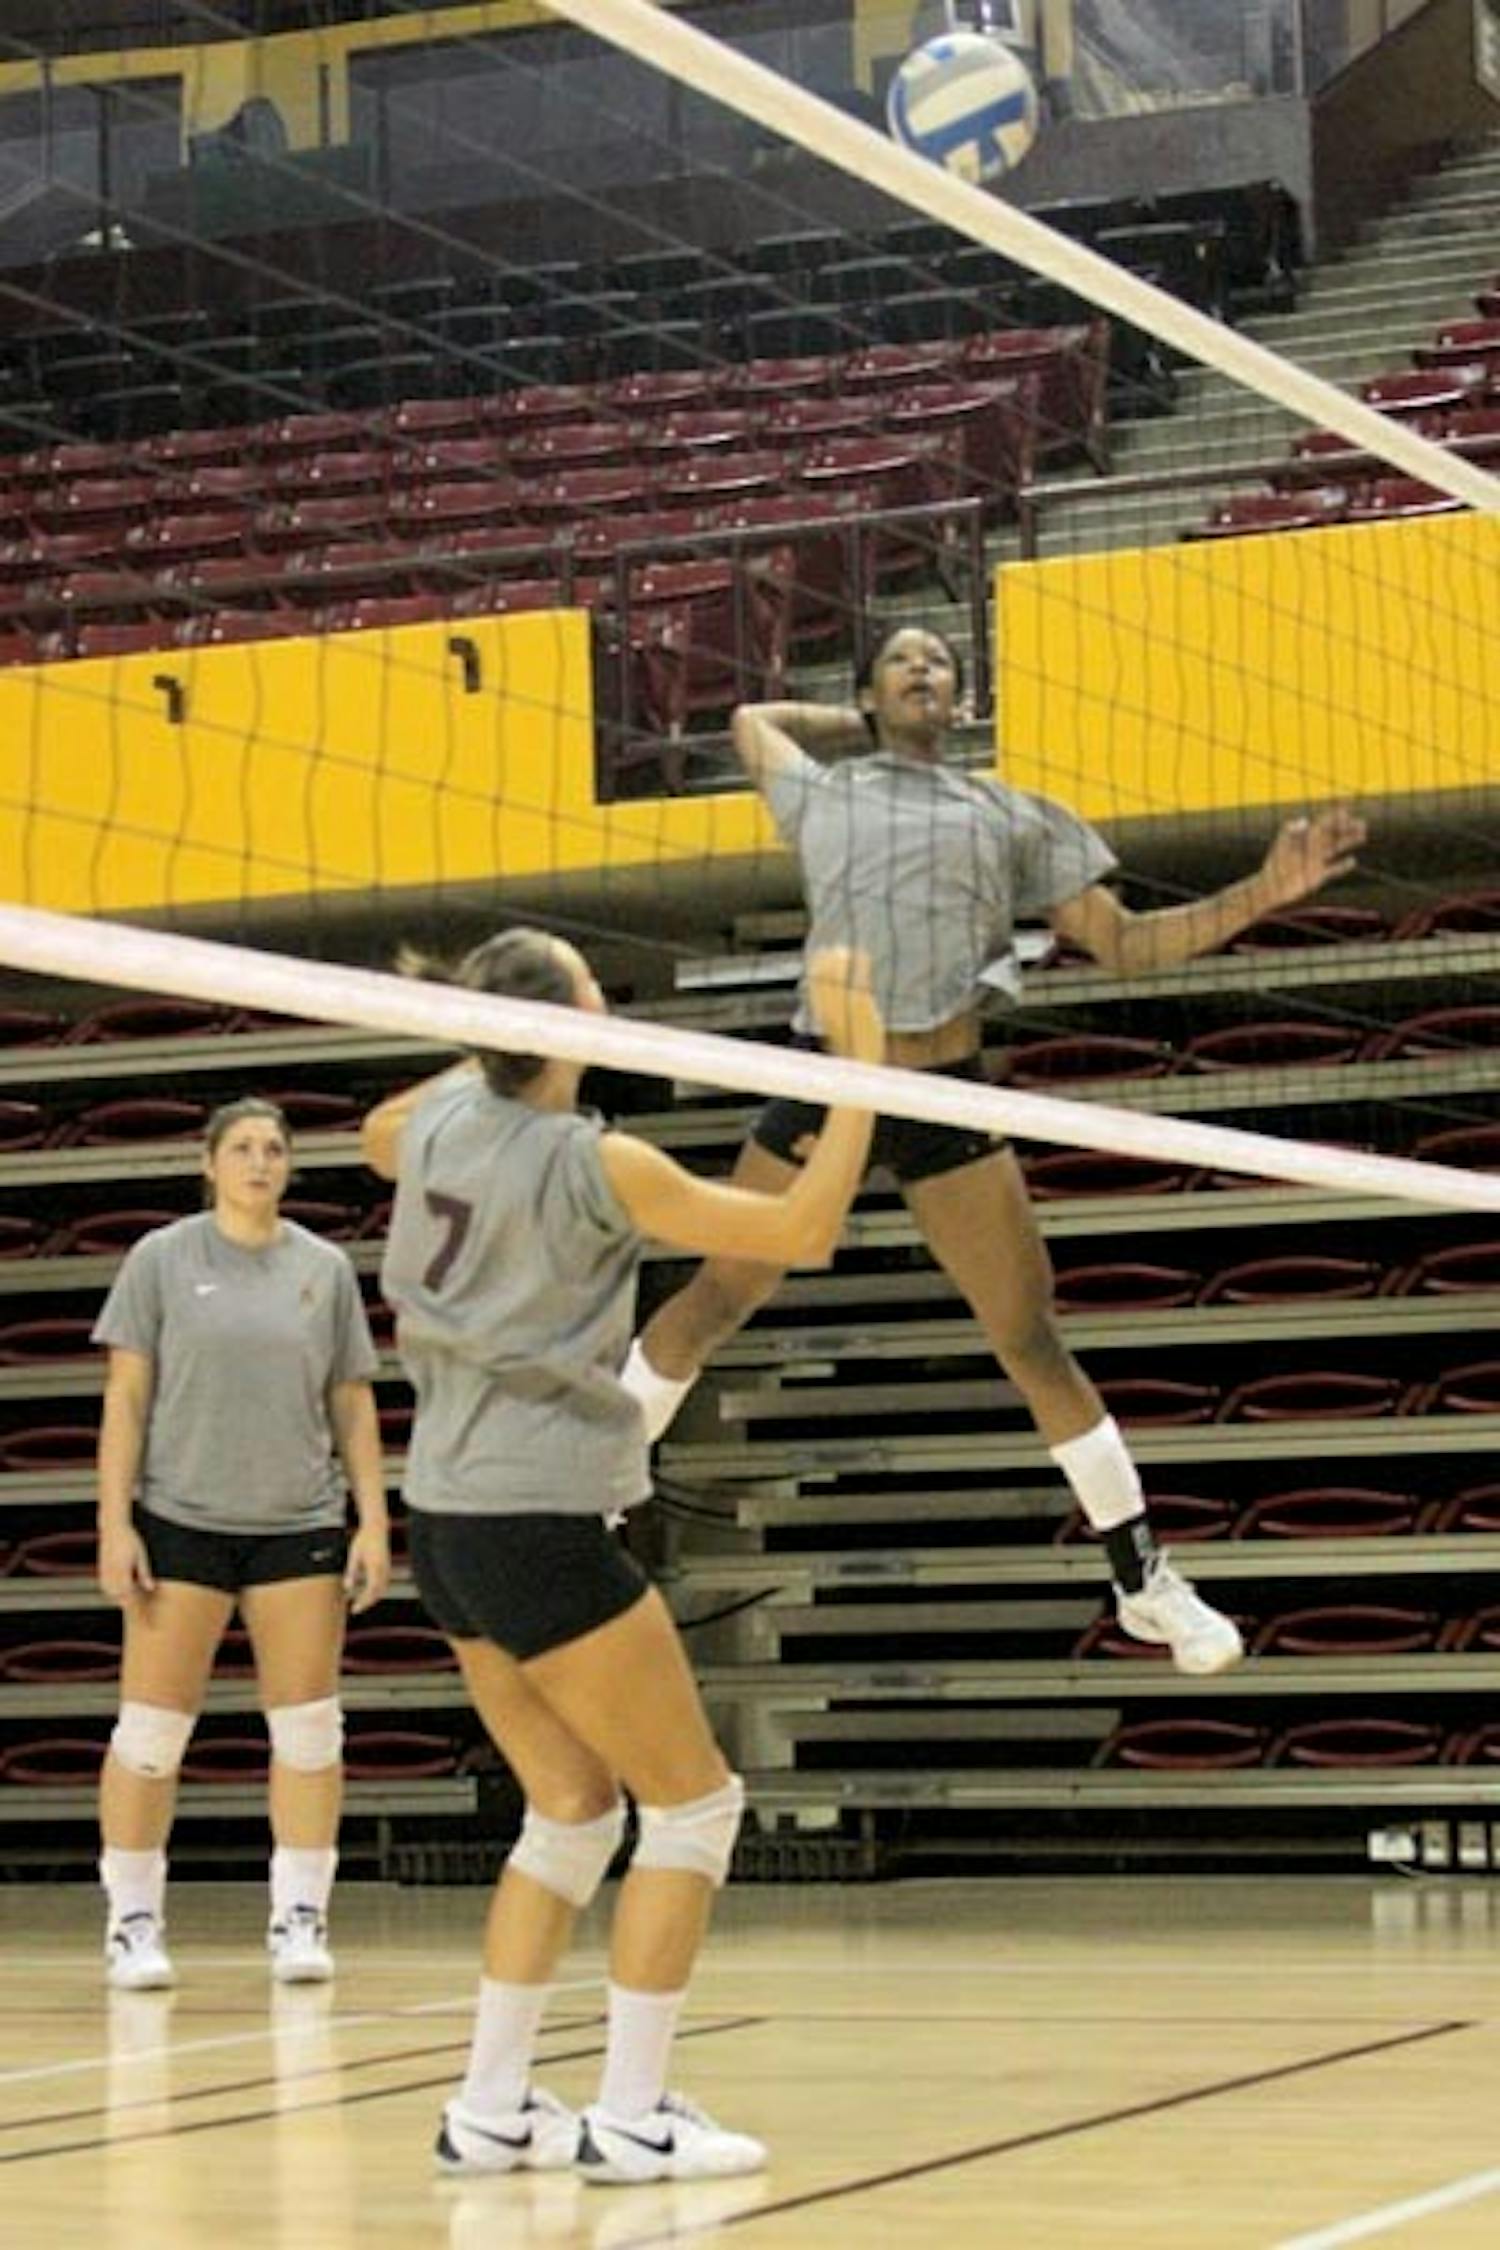 SET ON PERFECTION: Sophomore middle blocker Erica Wilson prepares a spike after a set up from junior setter Cat Highmark at practice last week. The Sun Devils open their season Friday at the Dayton Flyer Classic. (Photo by Andy Jeffreys)